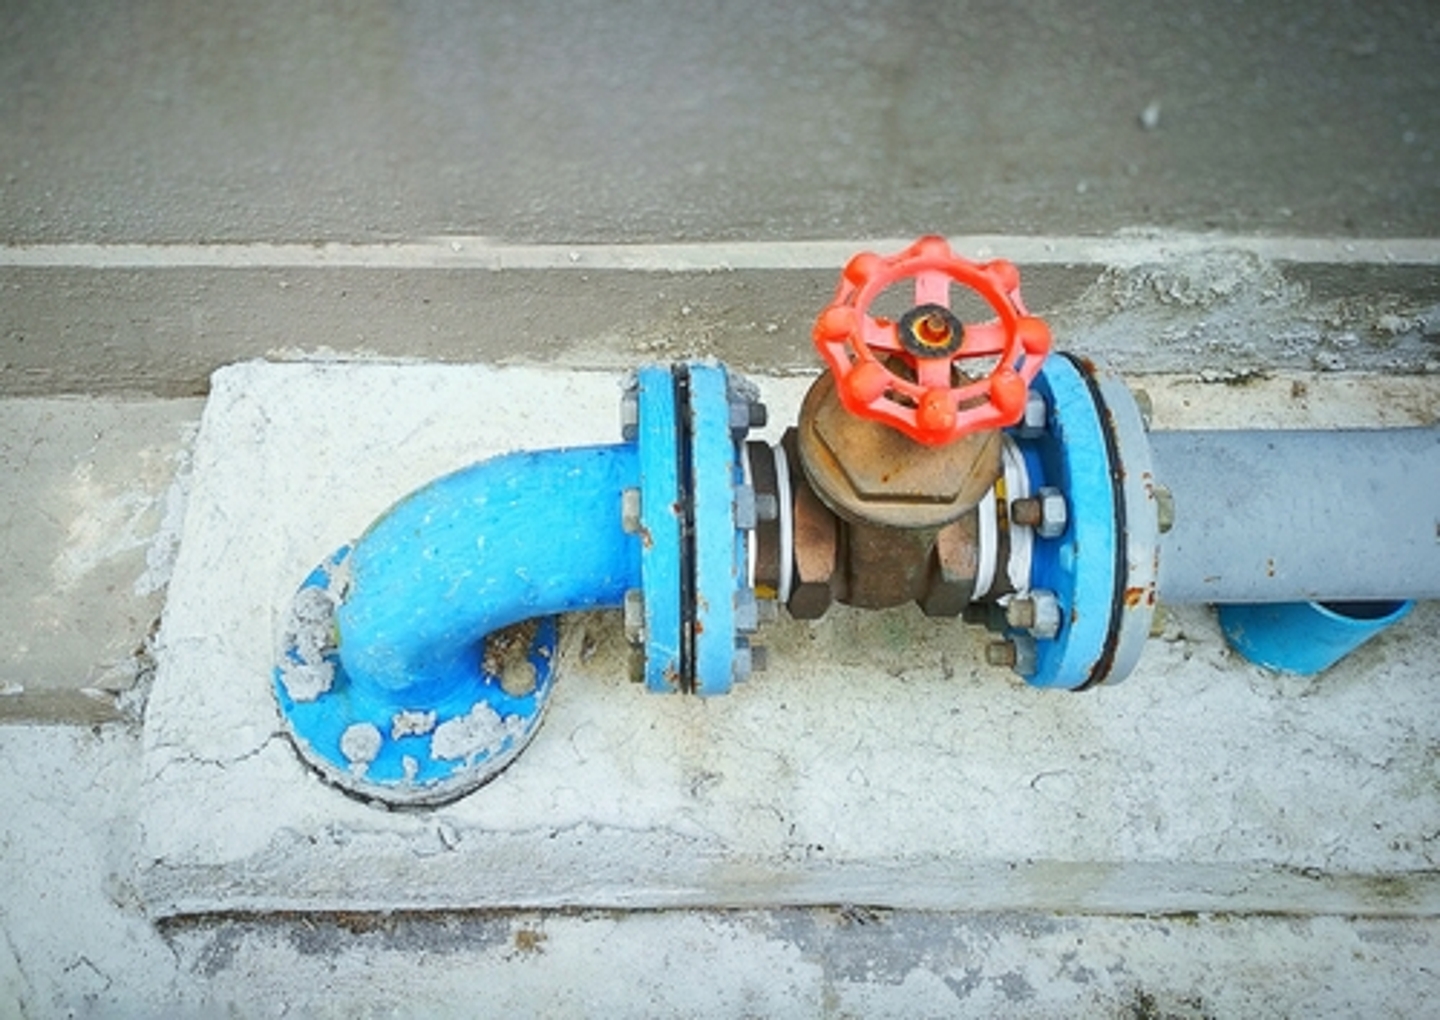 Knowing where to locate the main water shutoff valve can help prevent water damage to your home or business.